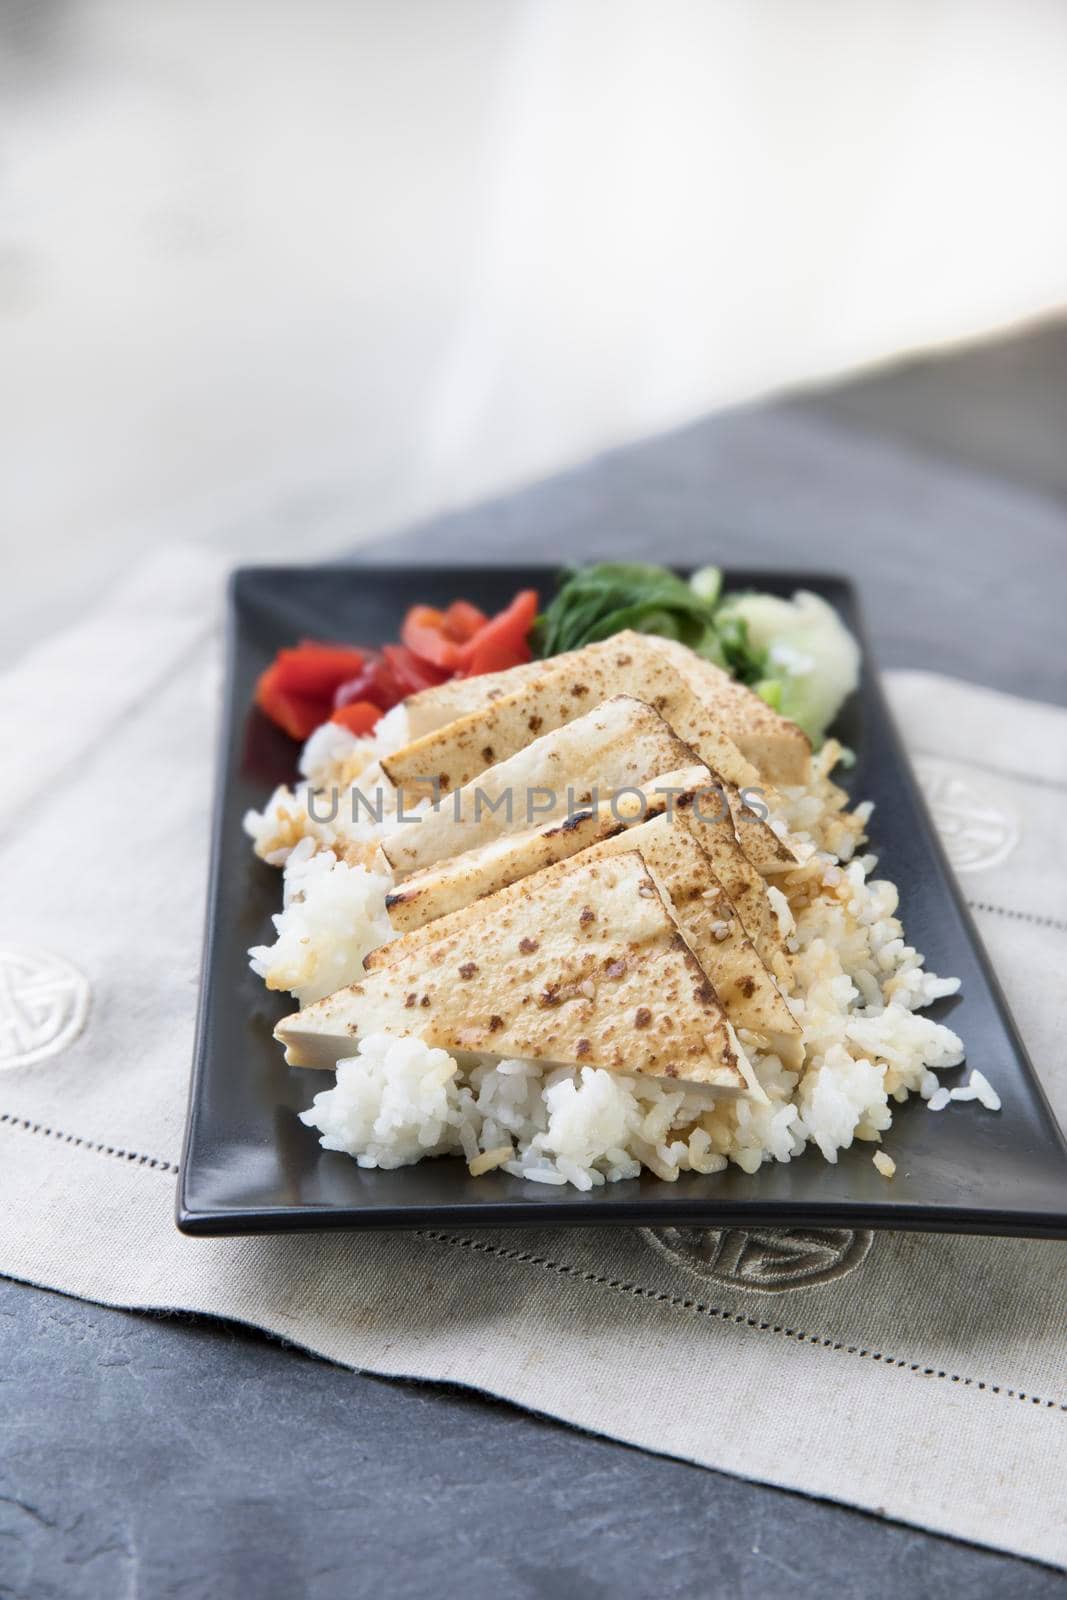 Grilled tofu on a bed of rice with vegetables